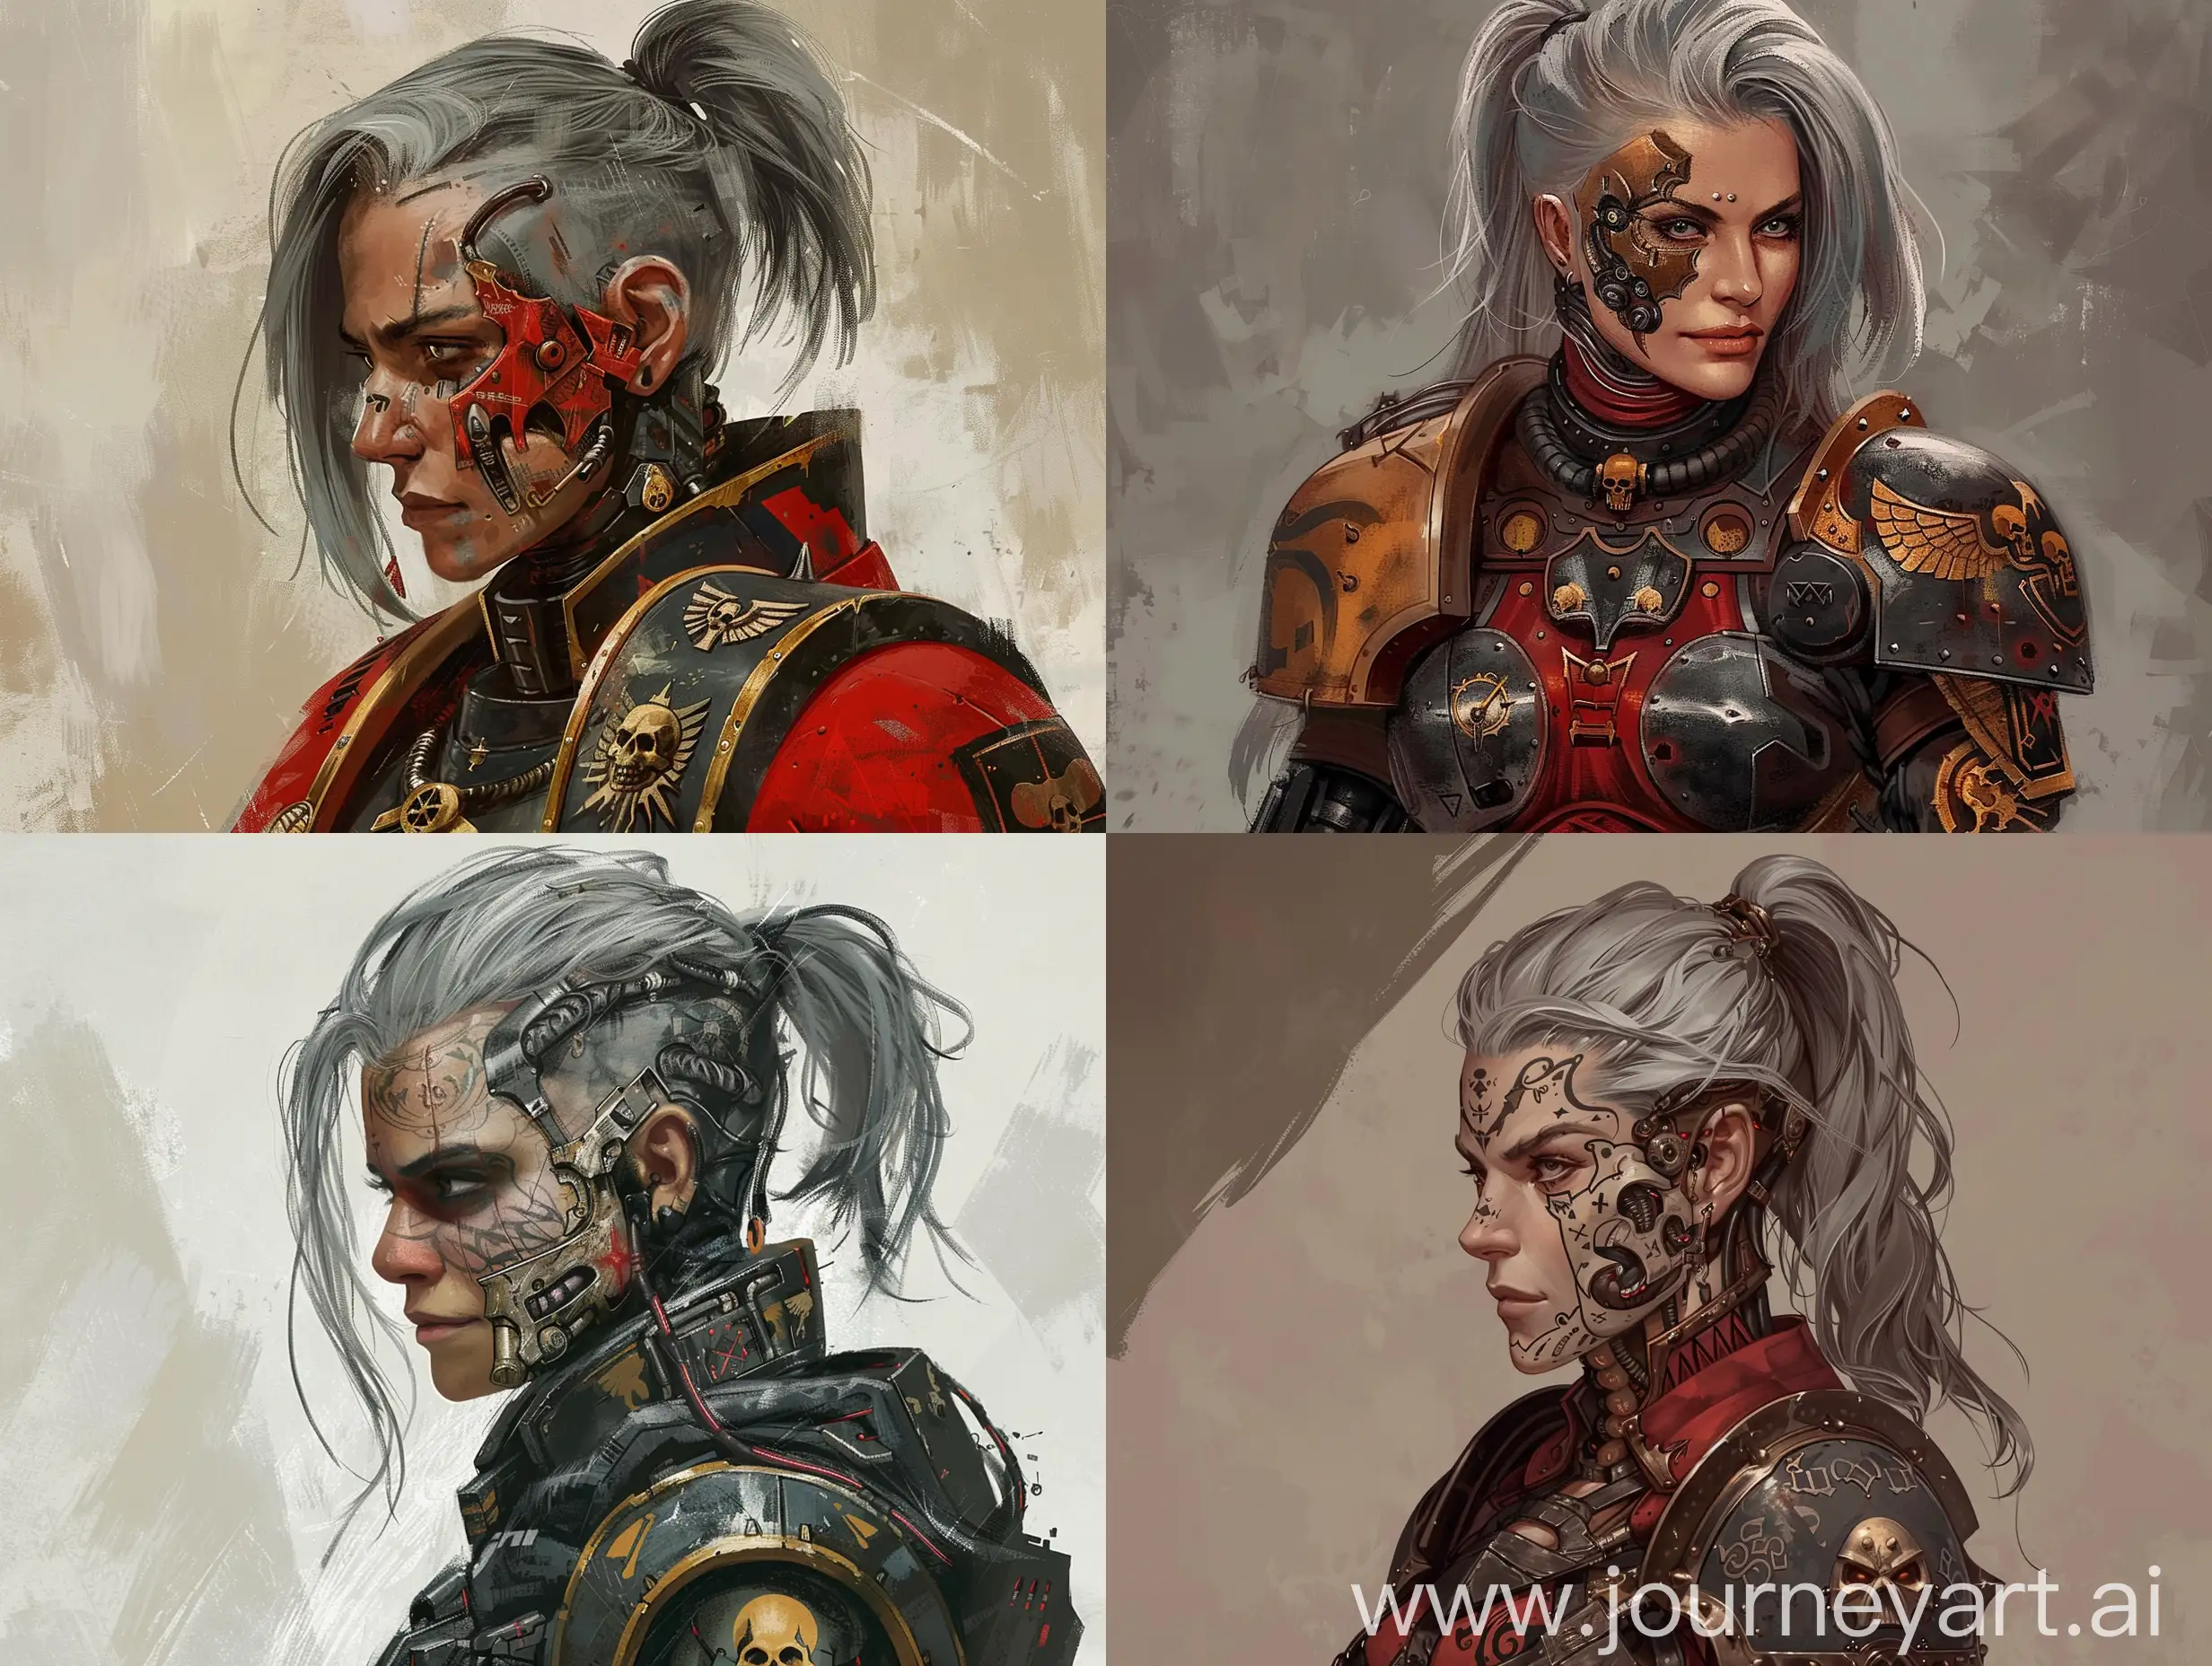 Charismatic-Female-Warhammer-40K-Leader-with-Grey-Hair-and-Cyborg-Features-Comic-Style-Art-by-Artgerm-Guy-Denning-Jakub-Rozalski-and-Magali-Villeneuve